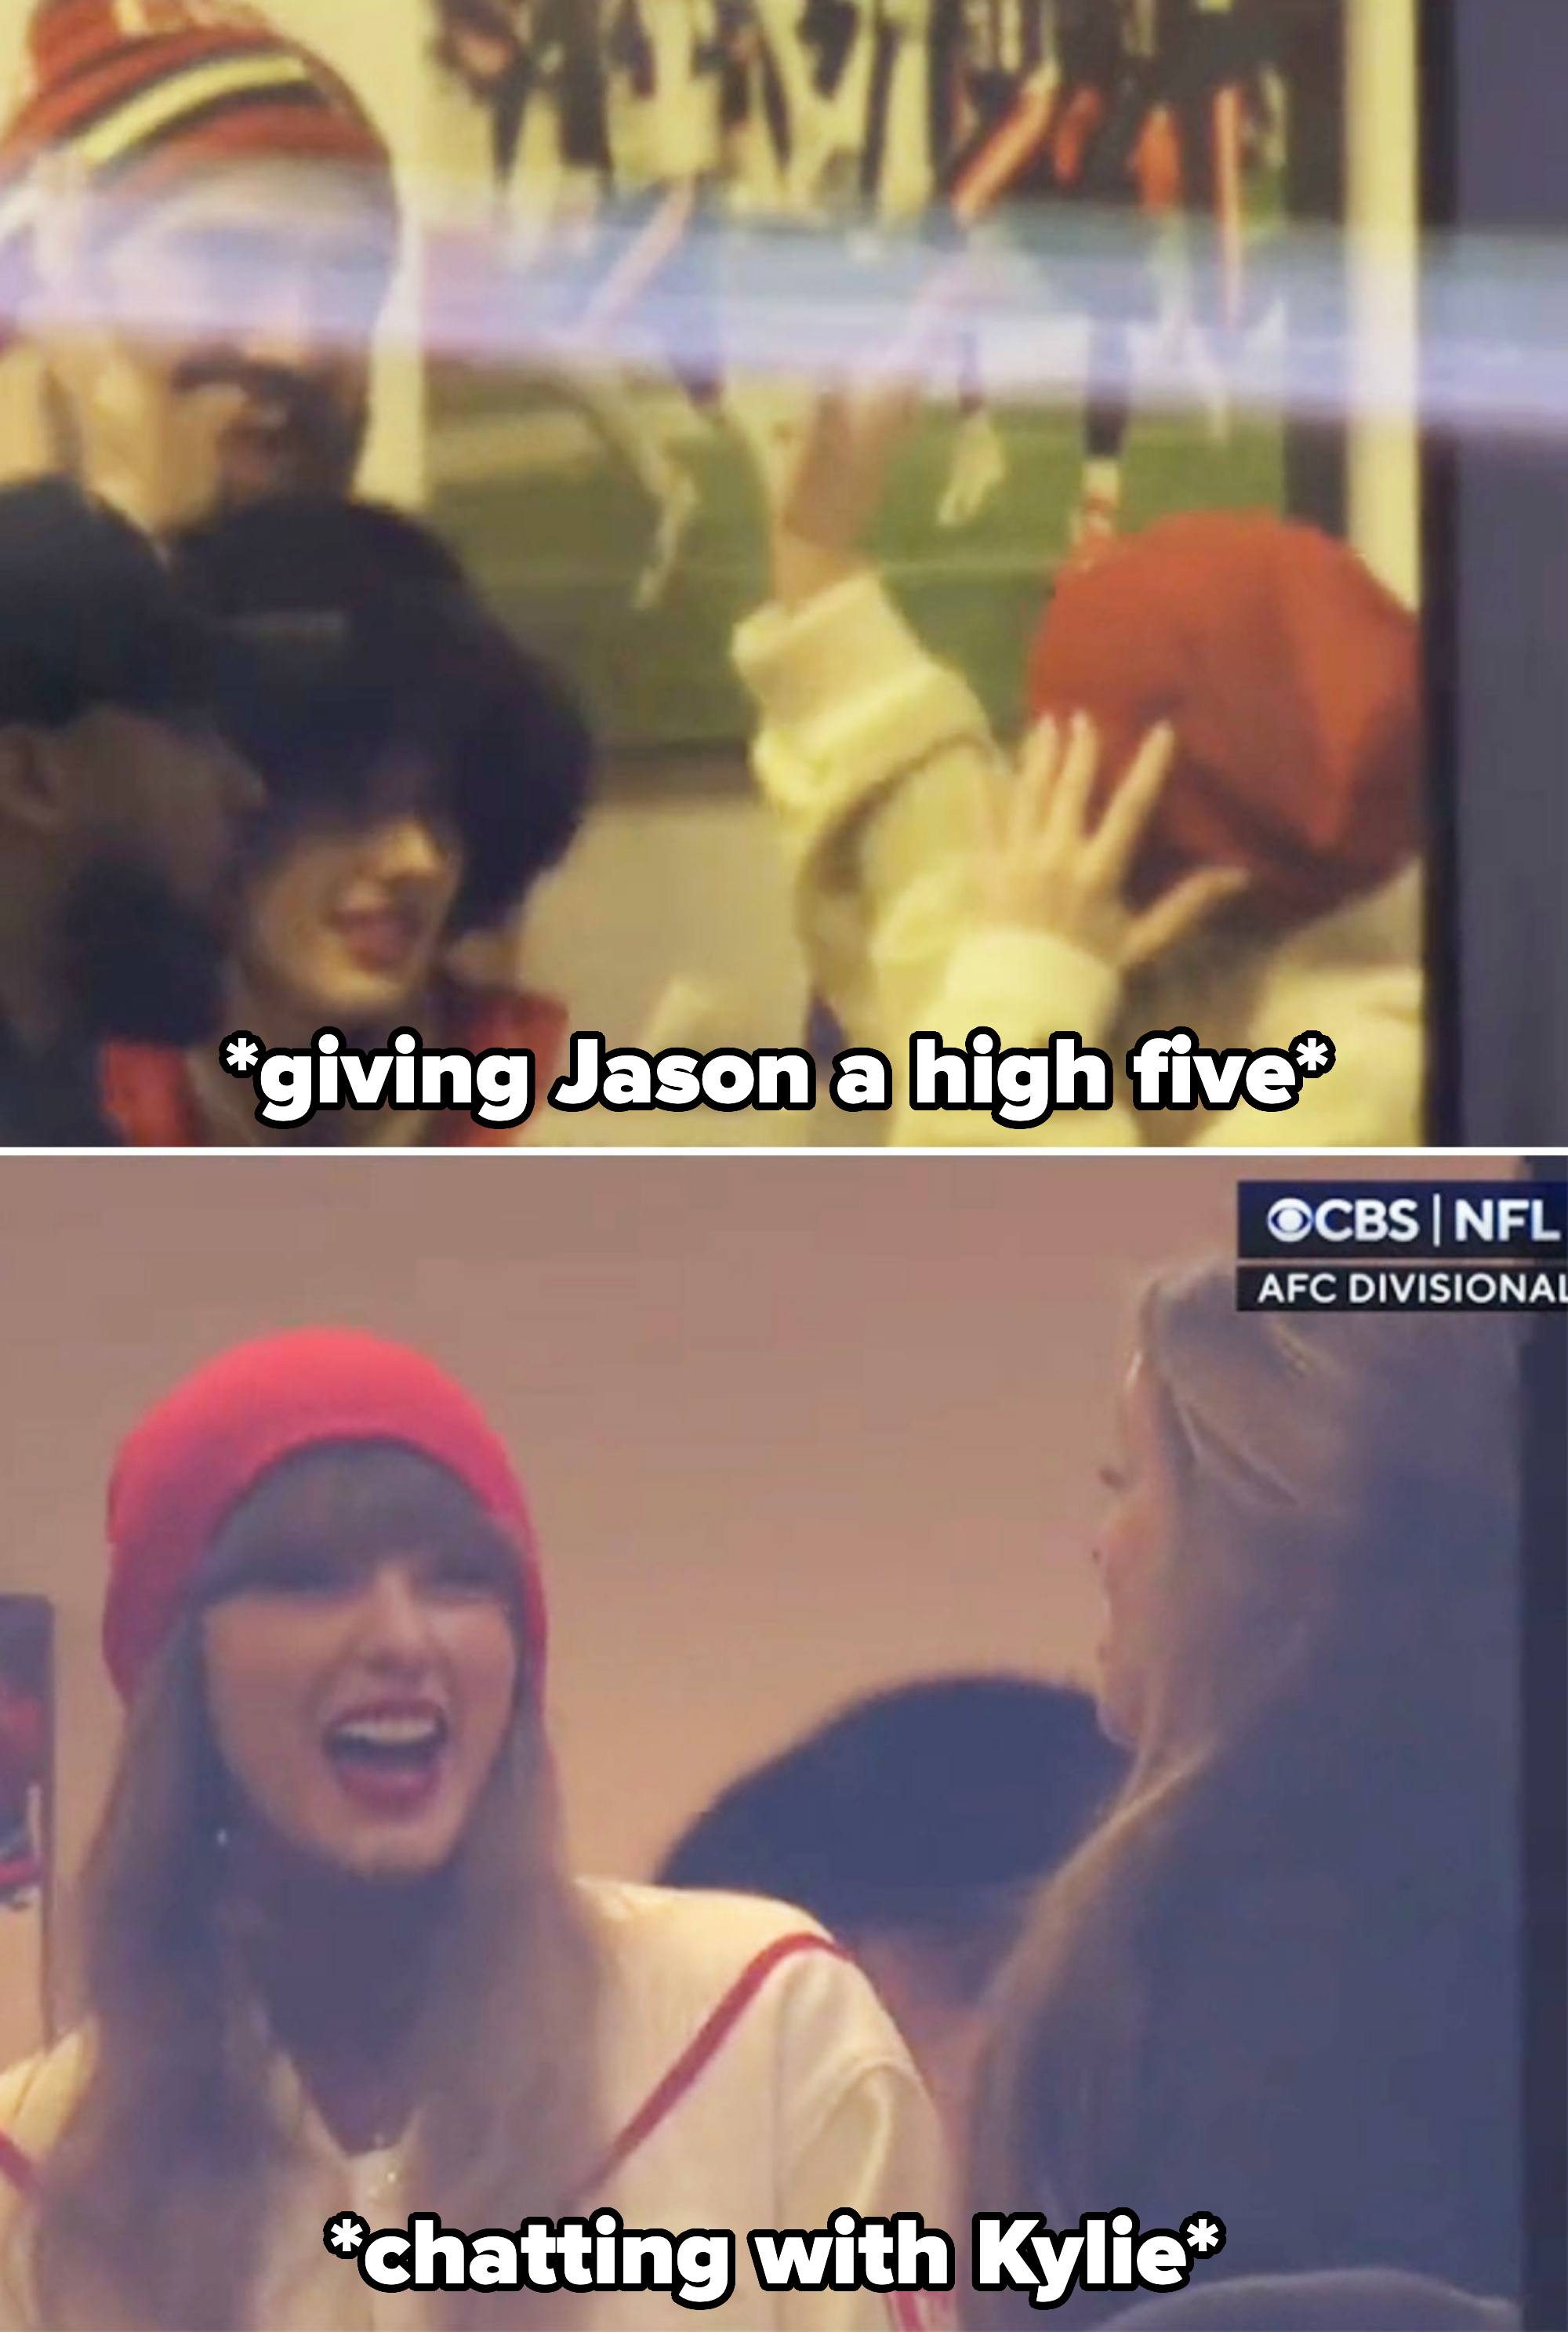 taylor giving jason a high five and talking to kylie